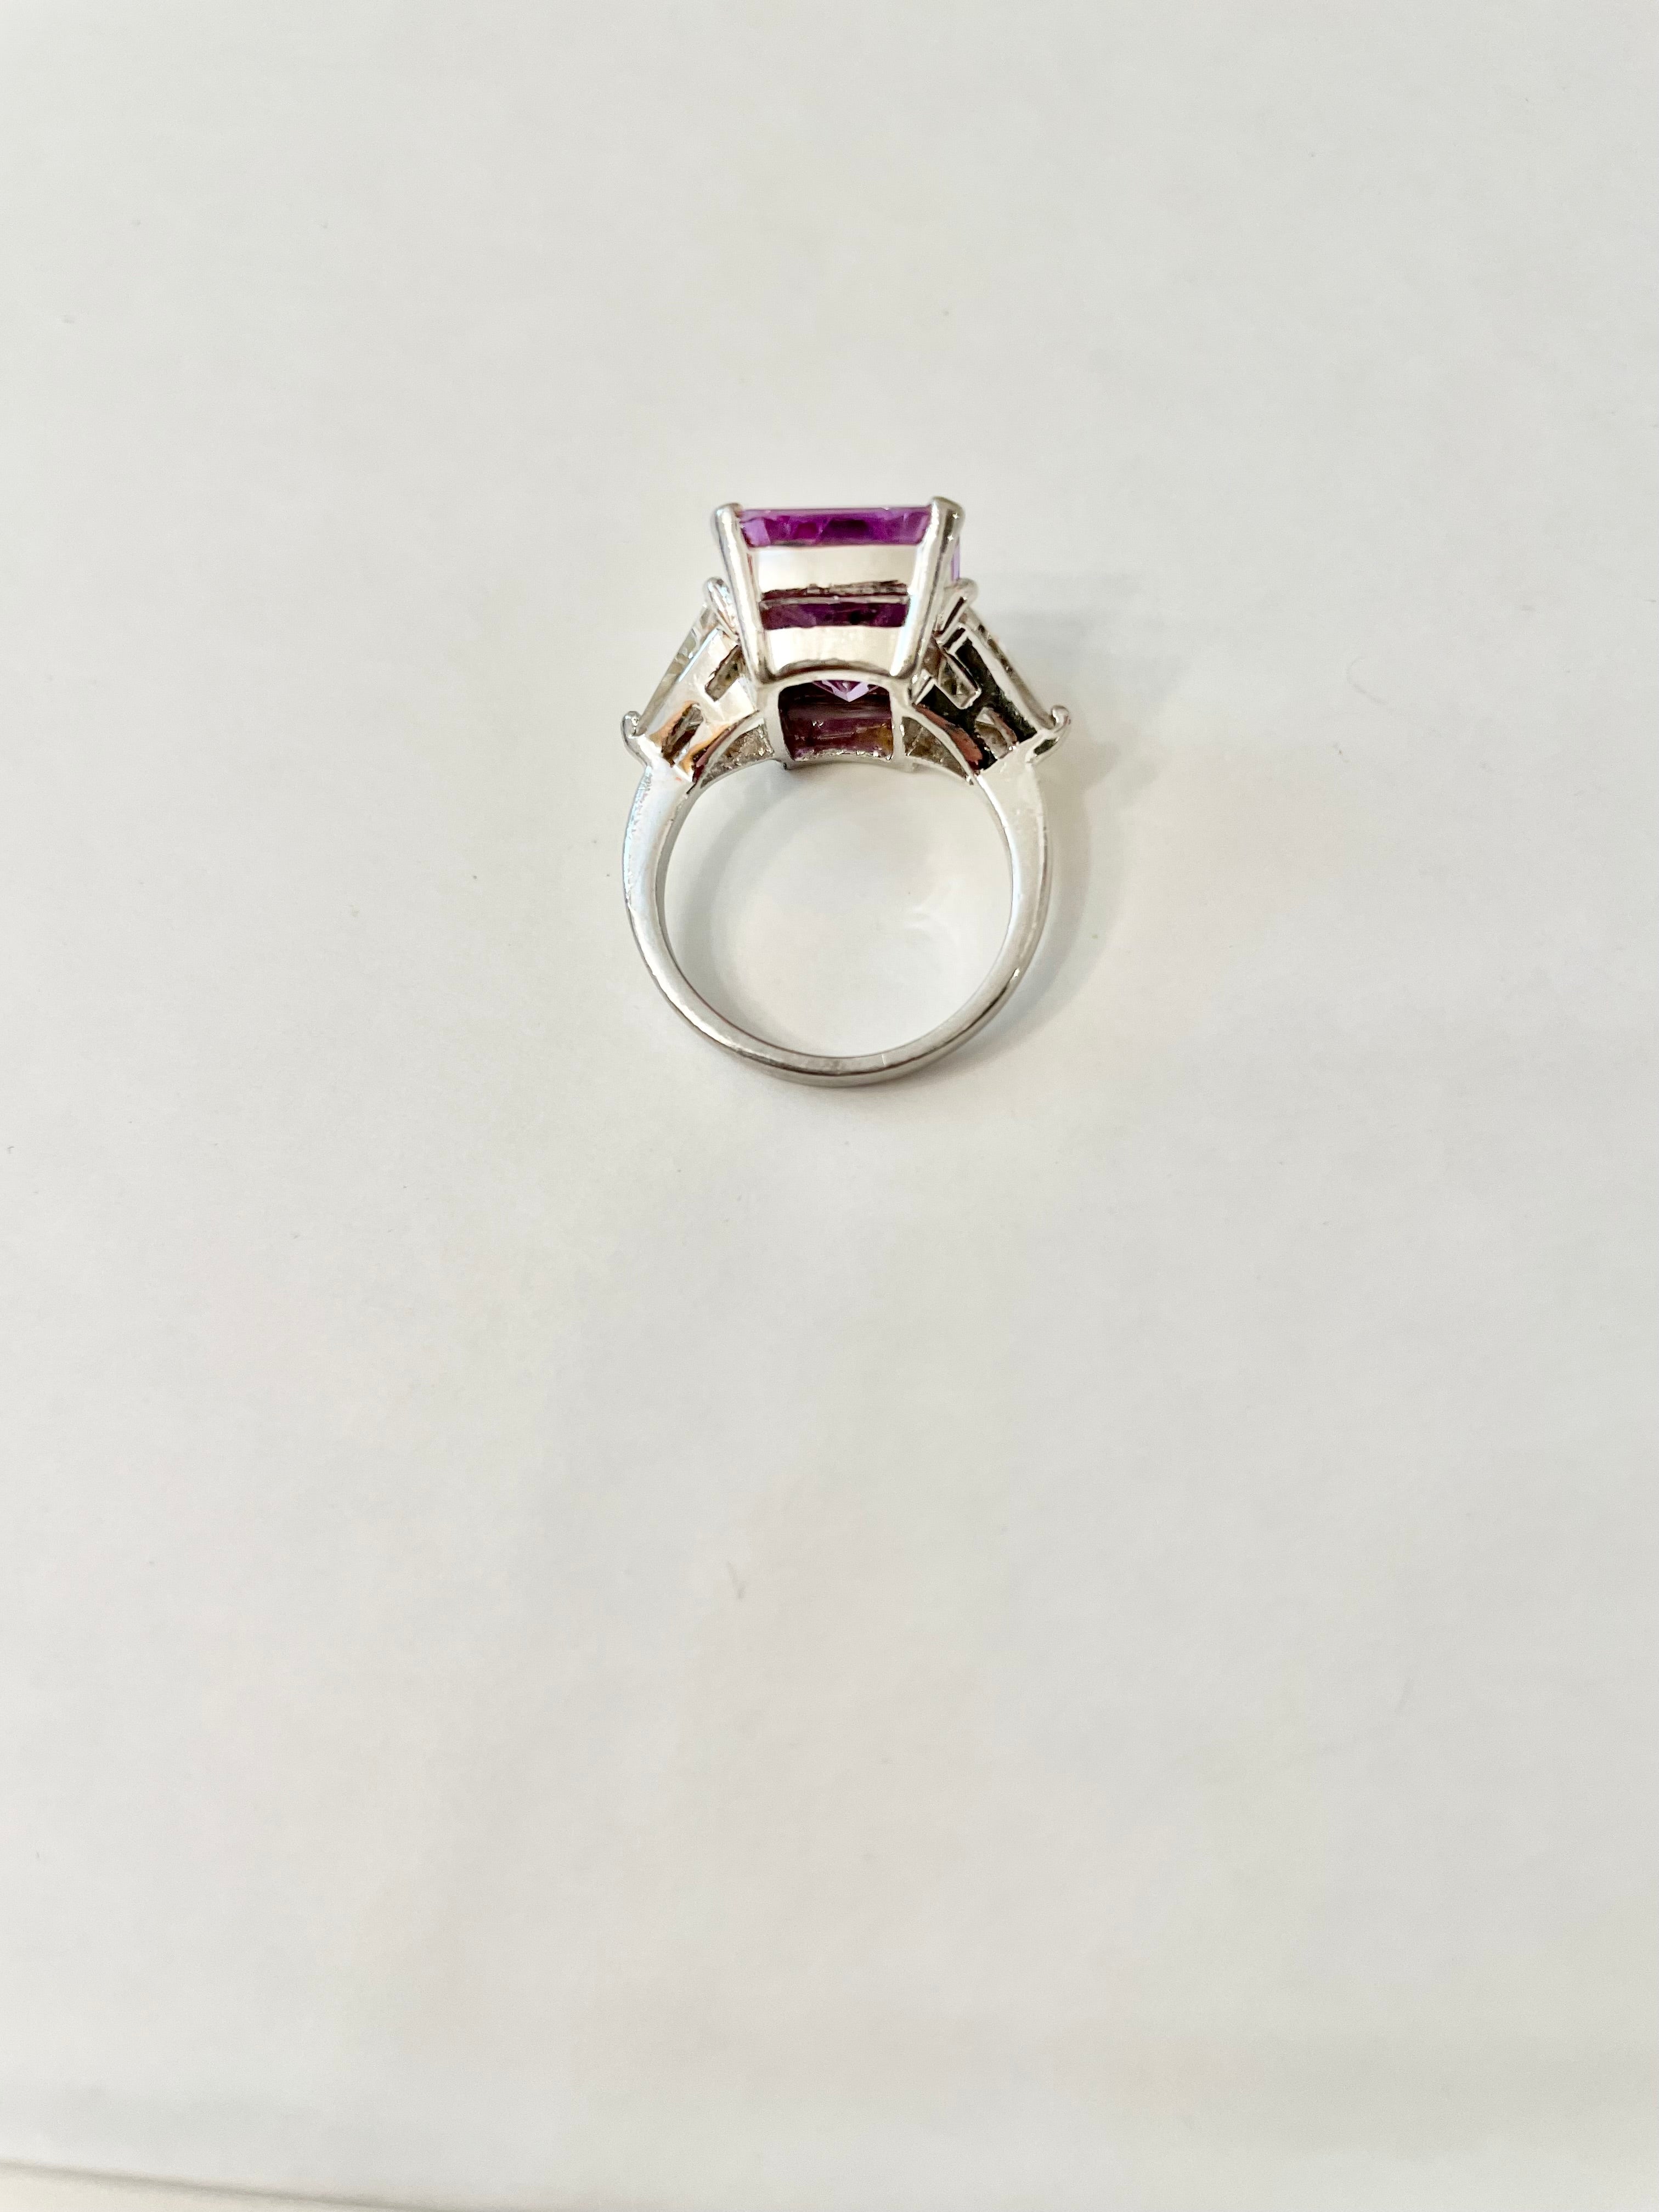 The Socialite and her love of gems! This cocktail ring is absolutely stunning!...